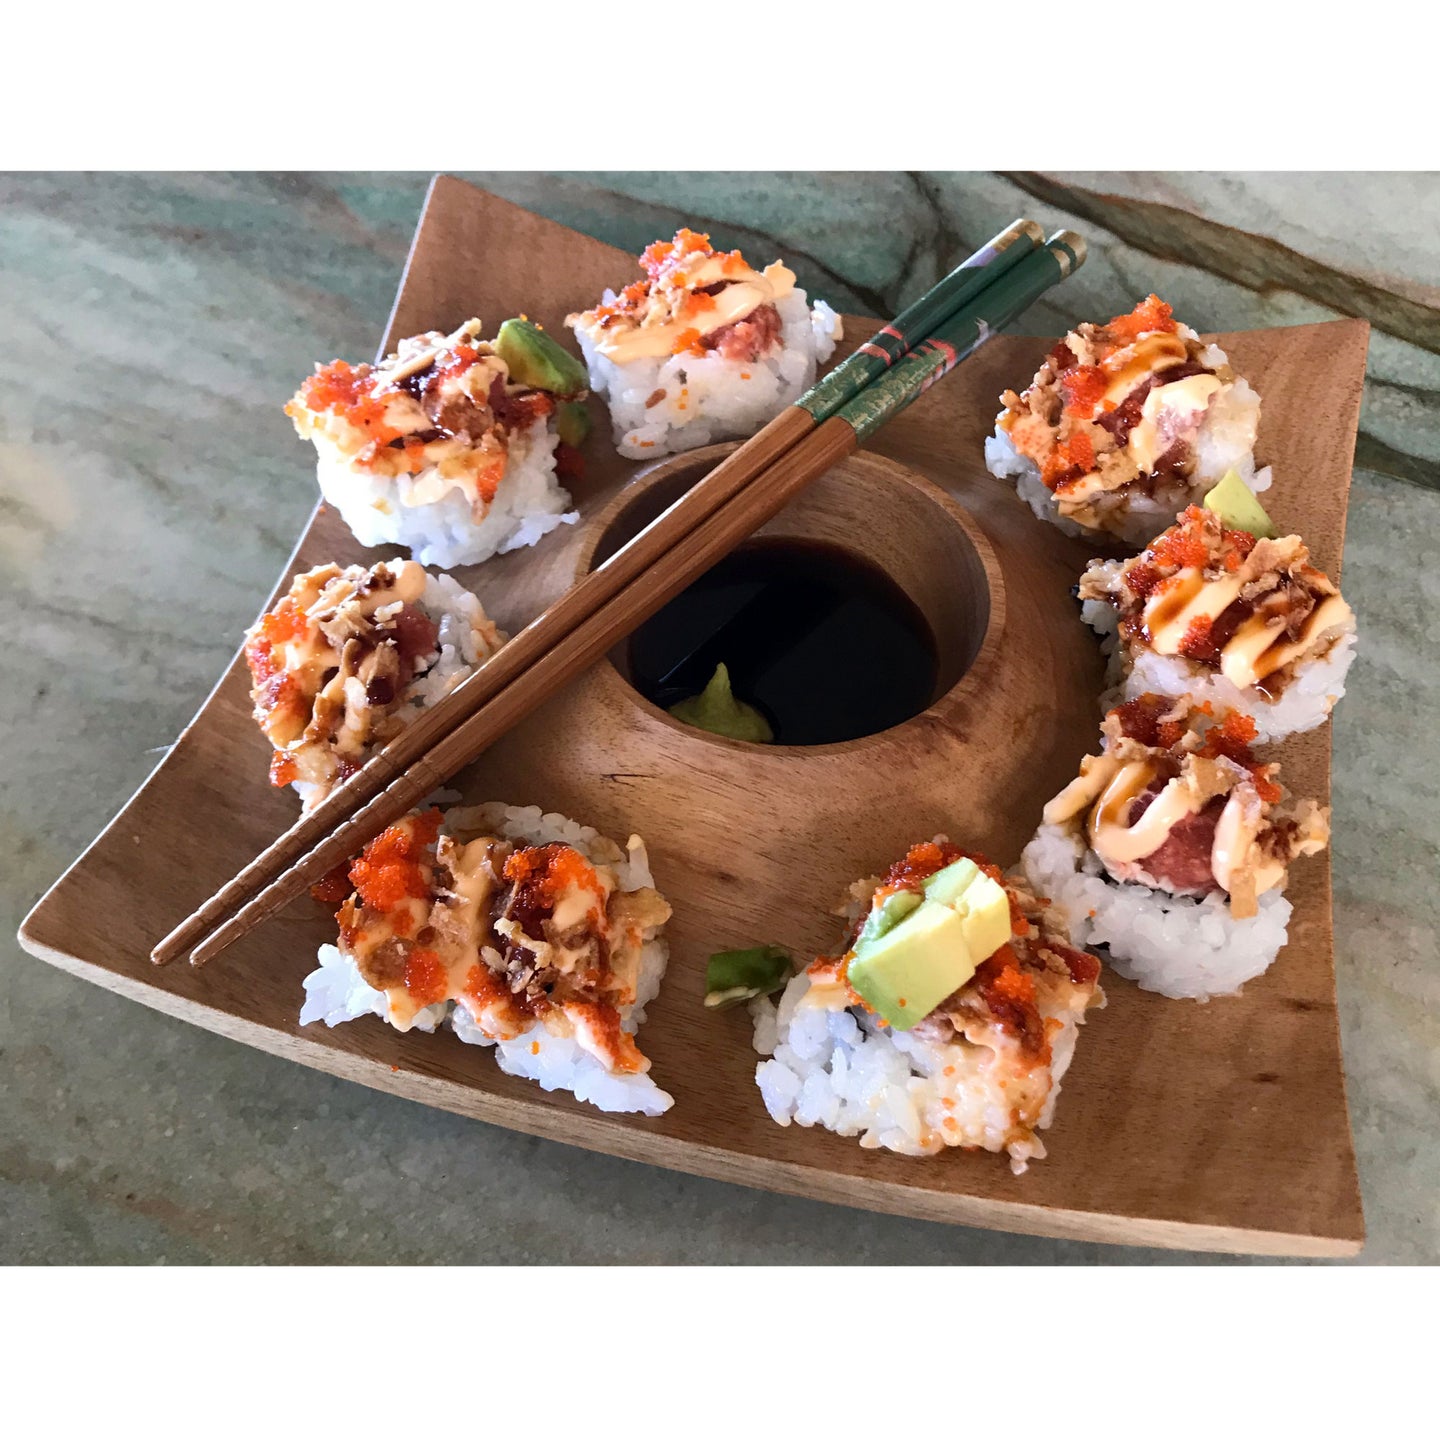 Personal Sushi Plate